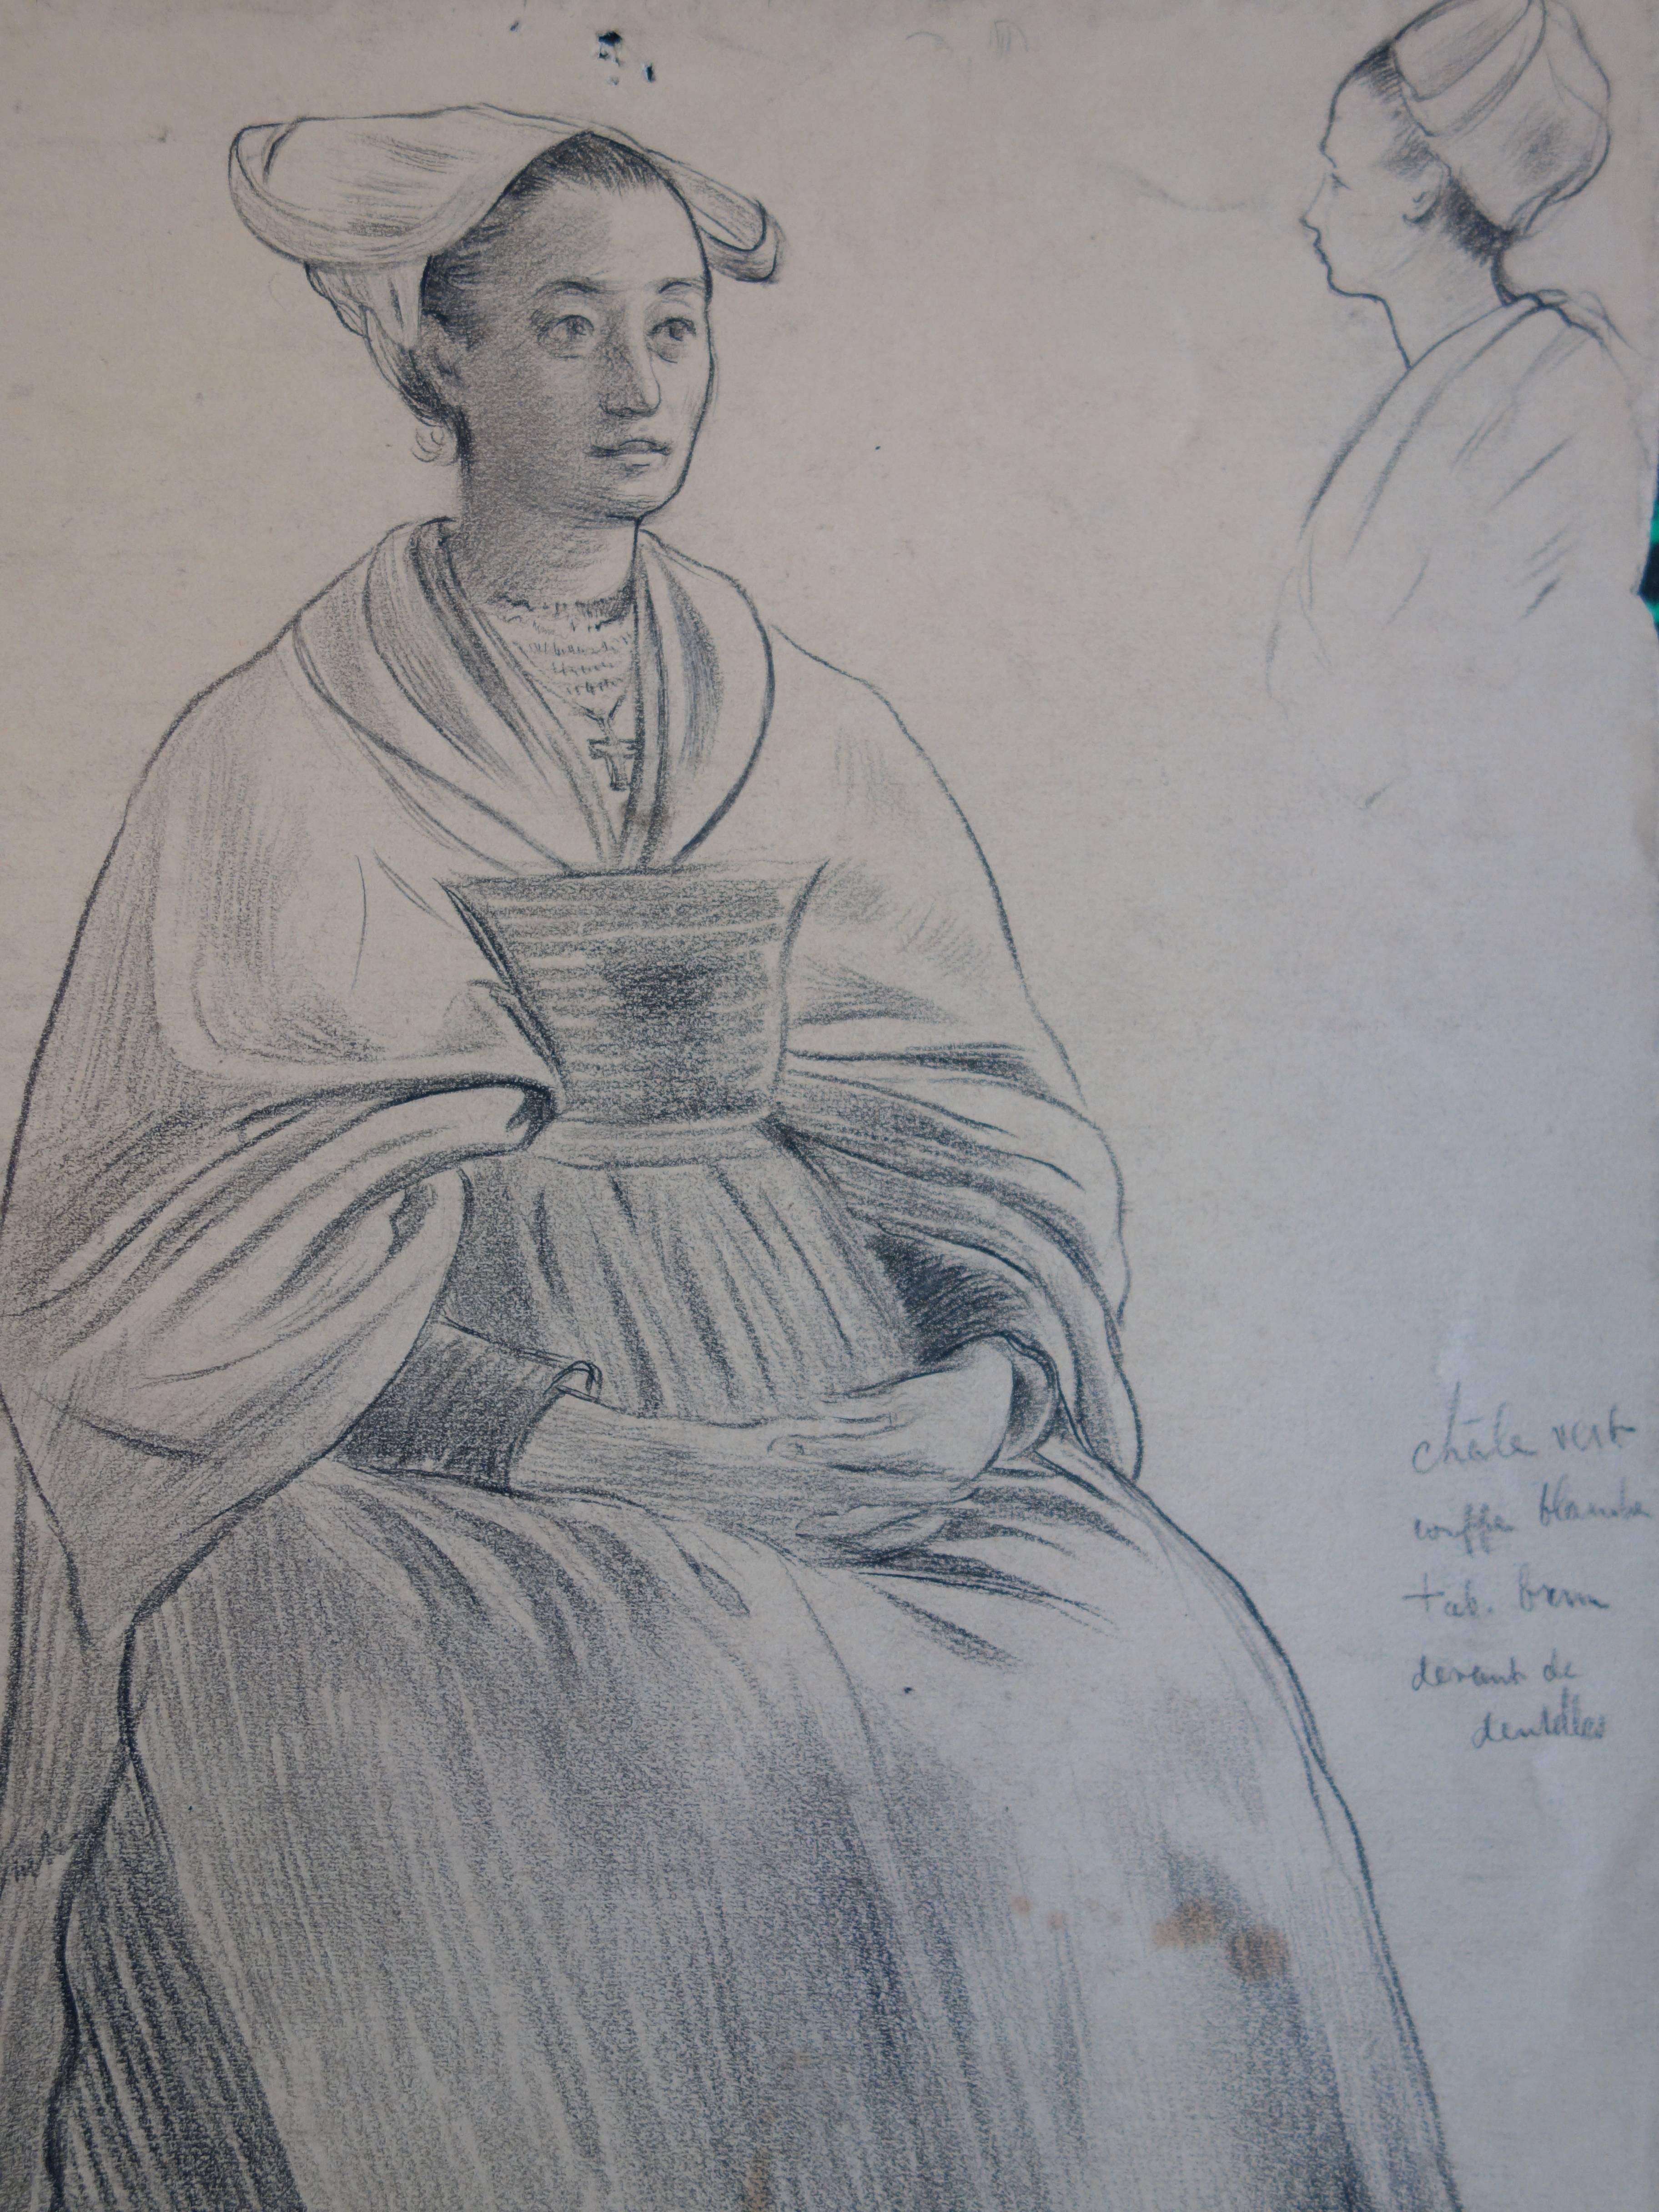 Gustave Poetzsch (1870-1950) 
Woman in a Brittany Costume (after Gauguin)

Original charcoals drawing
On tinted linen paper 18 x 23 cm (c. 9 x 7 in)
Provenance Gustave Poetzsch Estate

Very good condition - Light defects at the edge of the sheet,